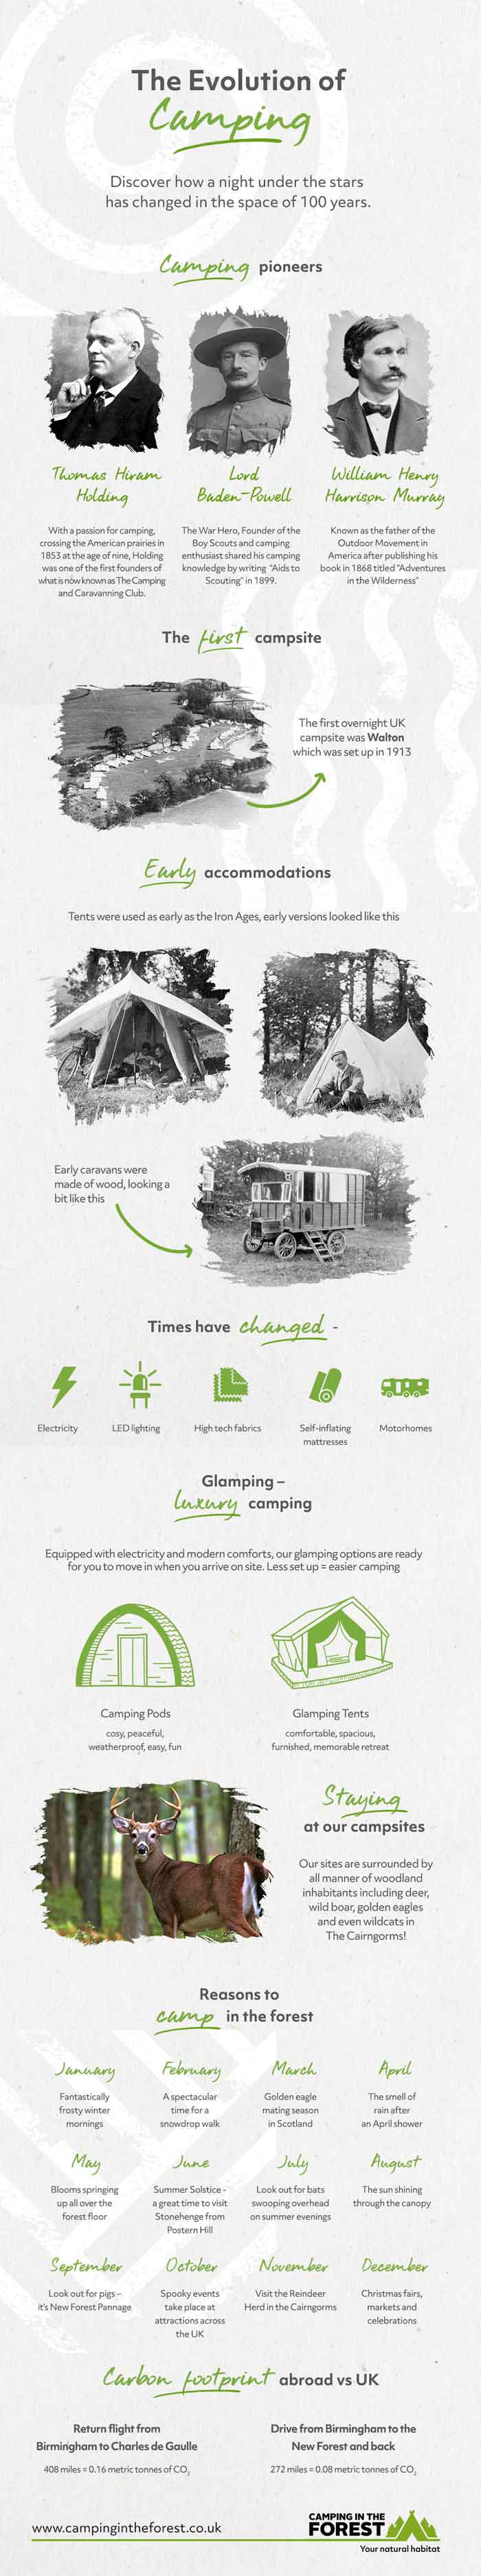 evolution-of-camping